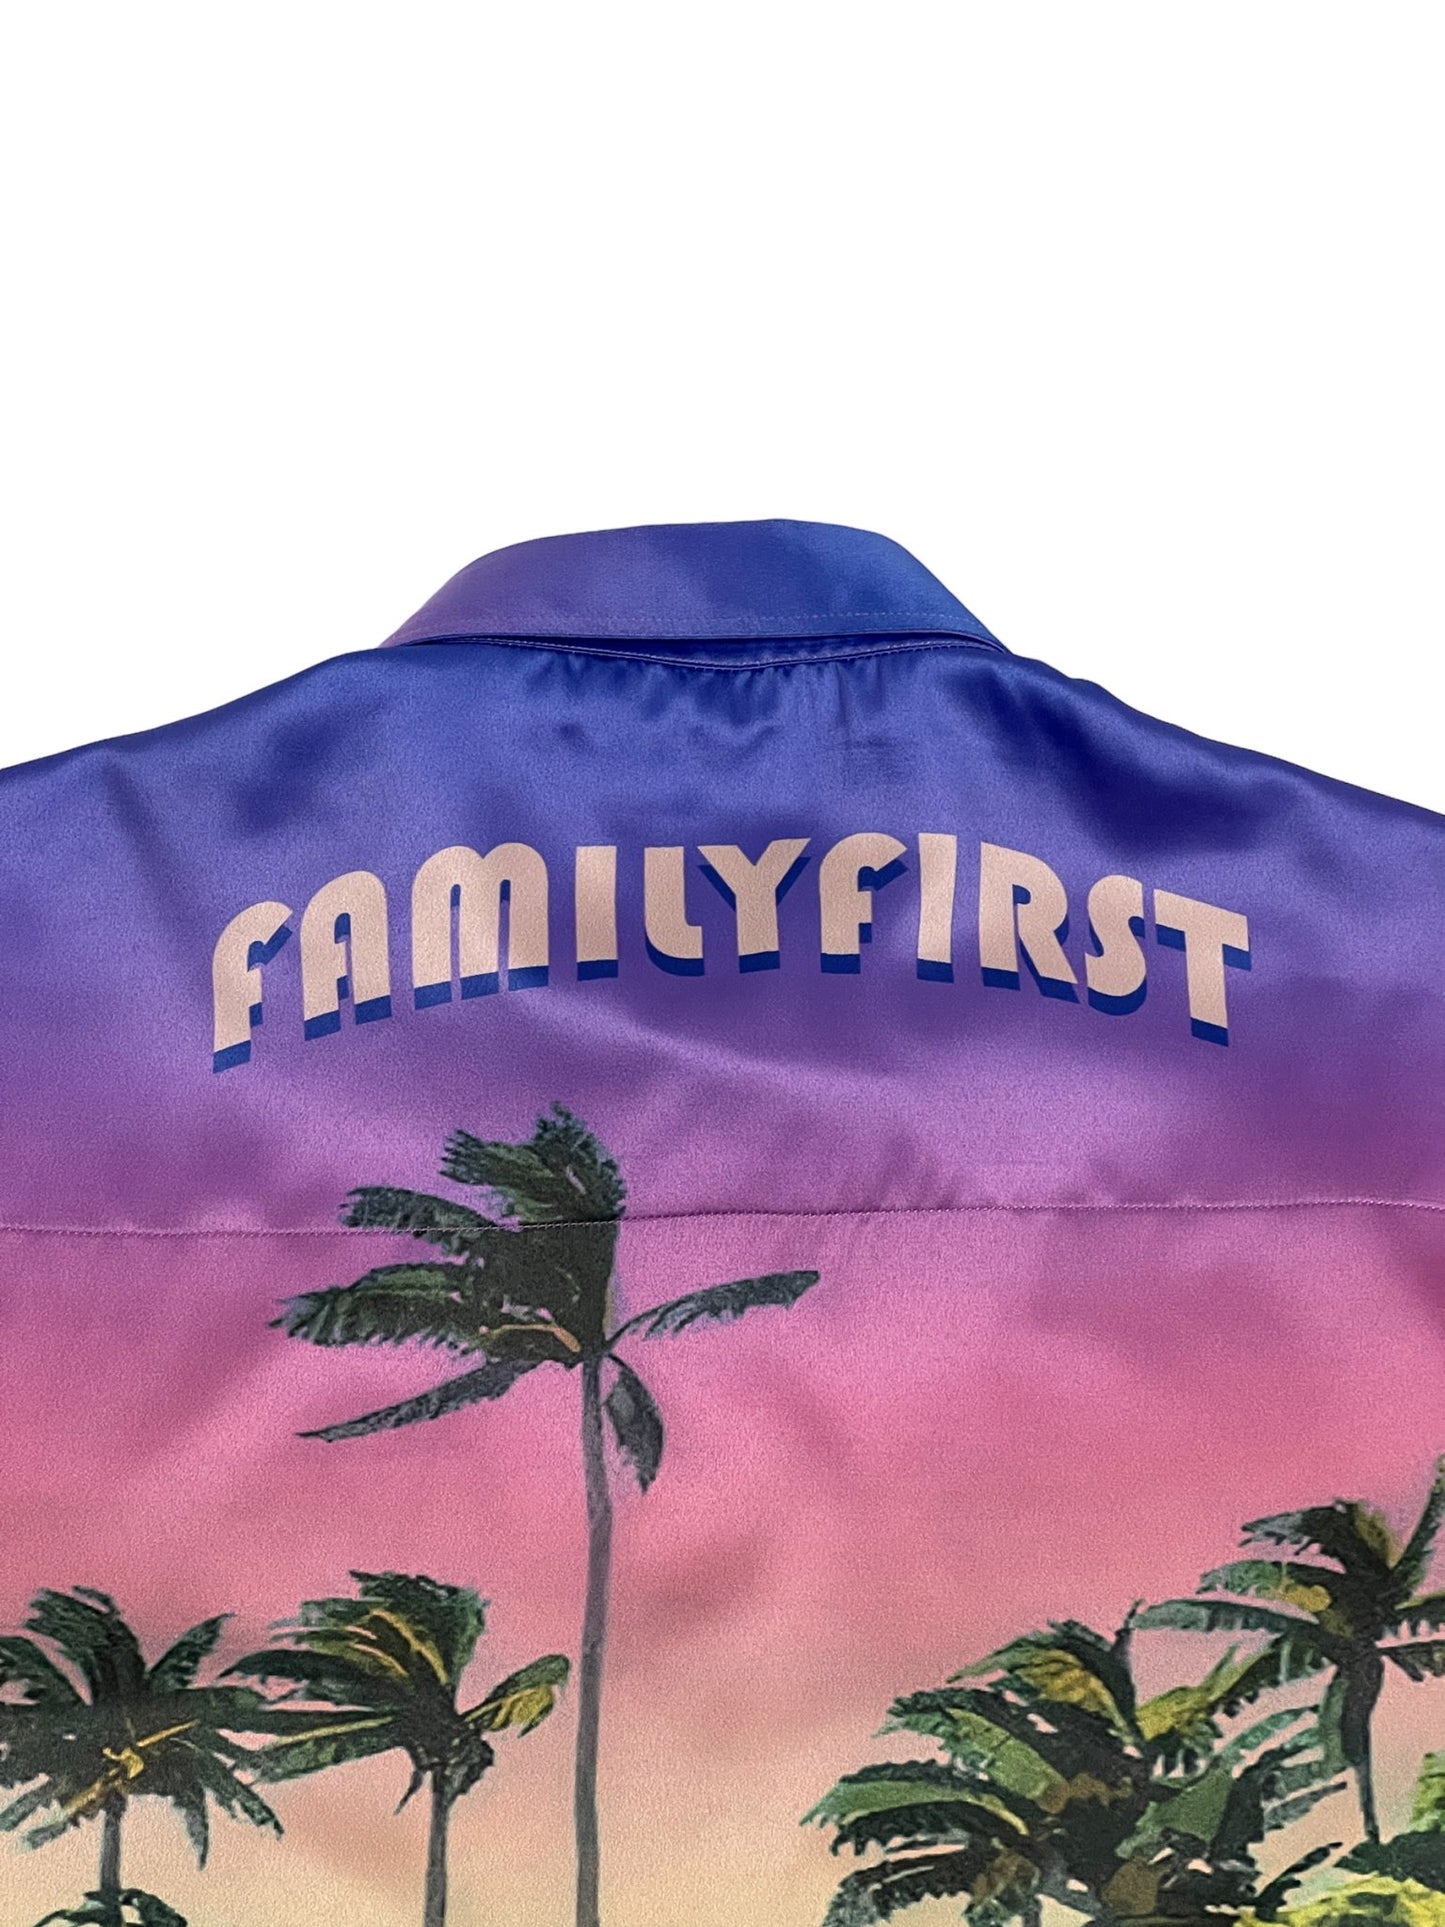 A FAMILY FIRST SHS2406 SHIRT SUNSET MC shirt that says FAMILY FIRST with palm trees in the background, Made In Italy.